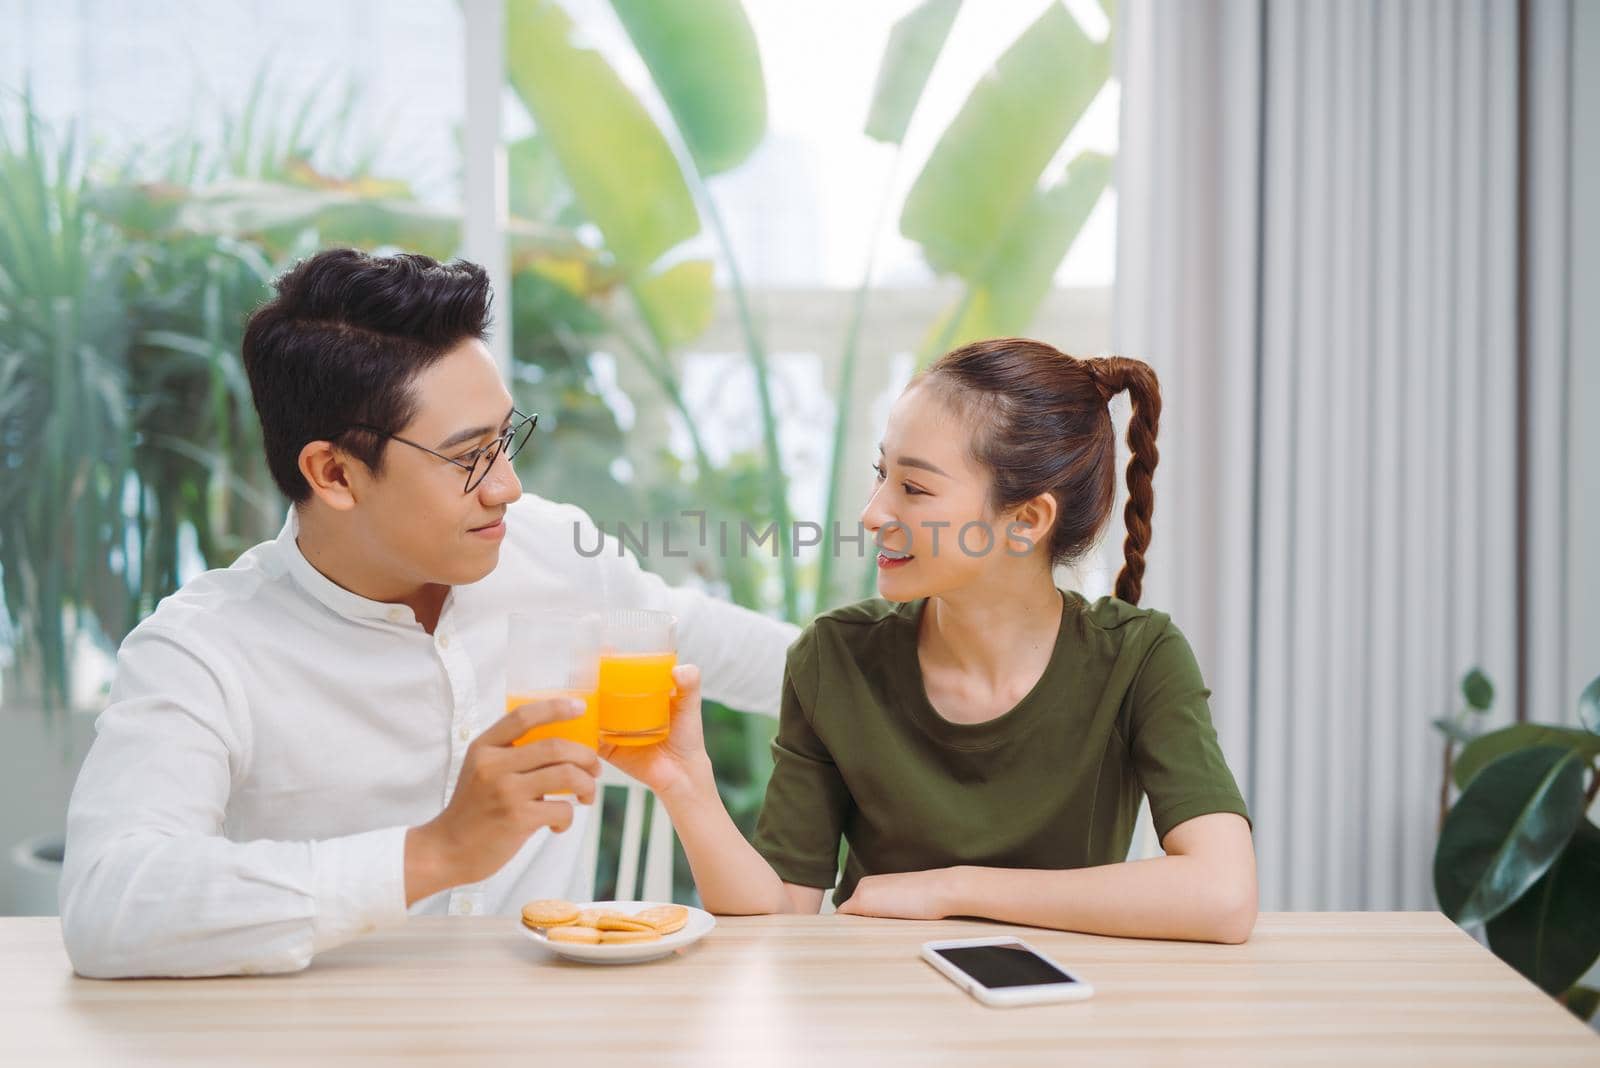 Loving man and woman drinking fresh orange juice enjoying pleasant morning cooking together, healthy meal and lifestyle concept by makidotvn